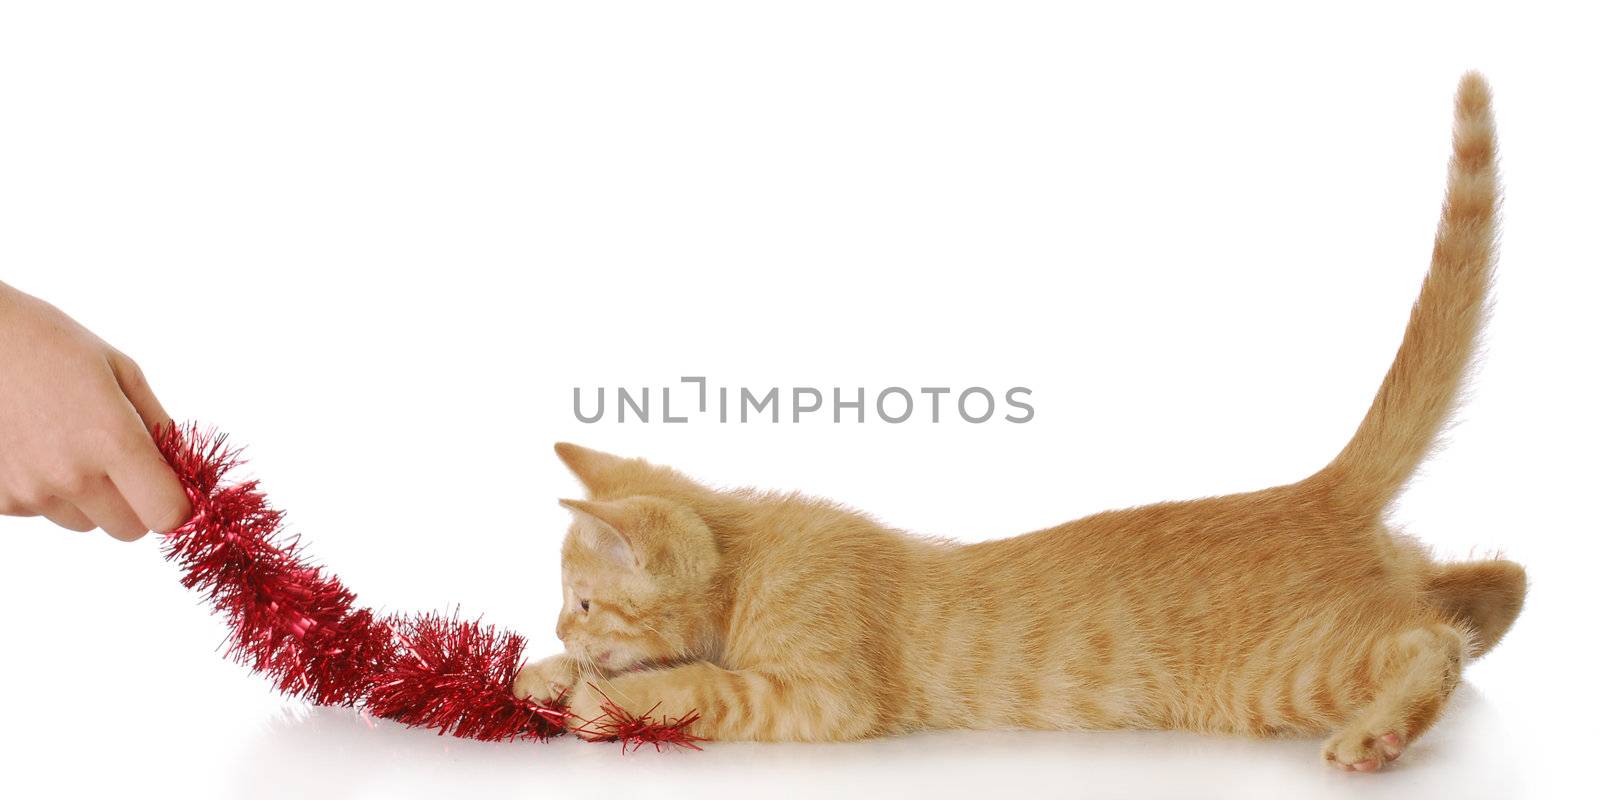 hand pulling on red cat toy with kitten chasing it with reflection on white background